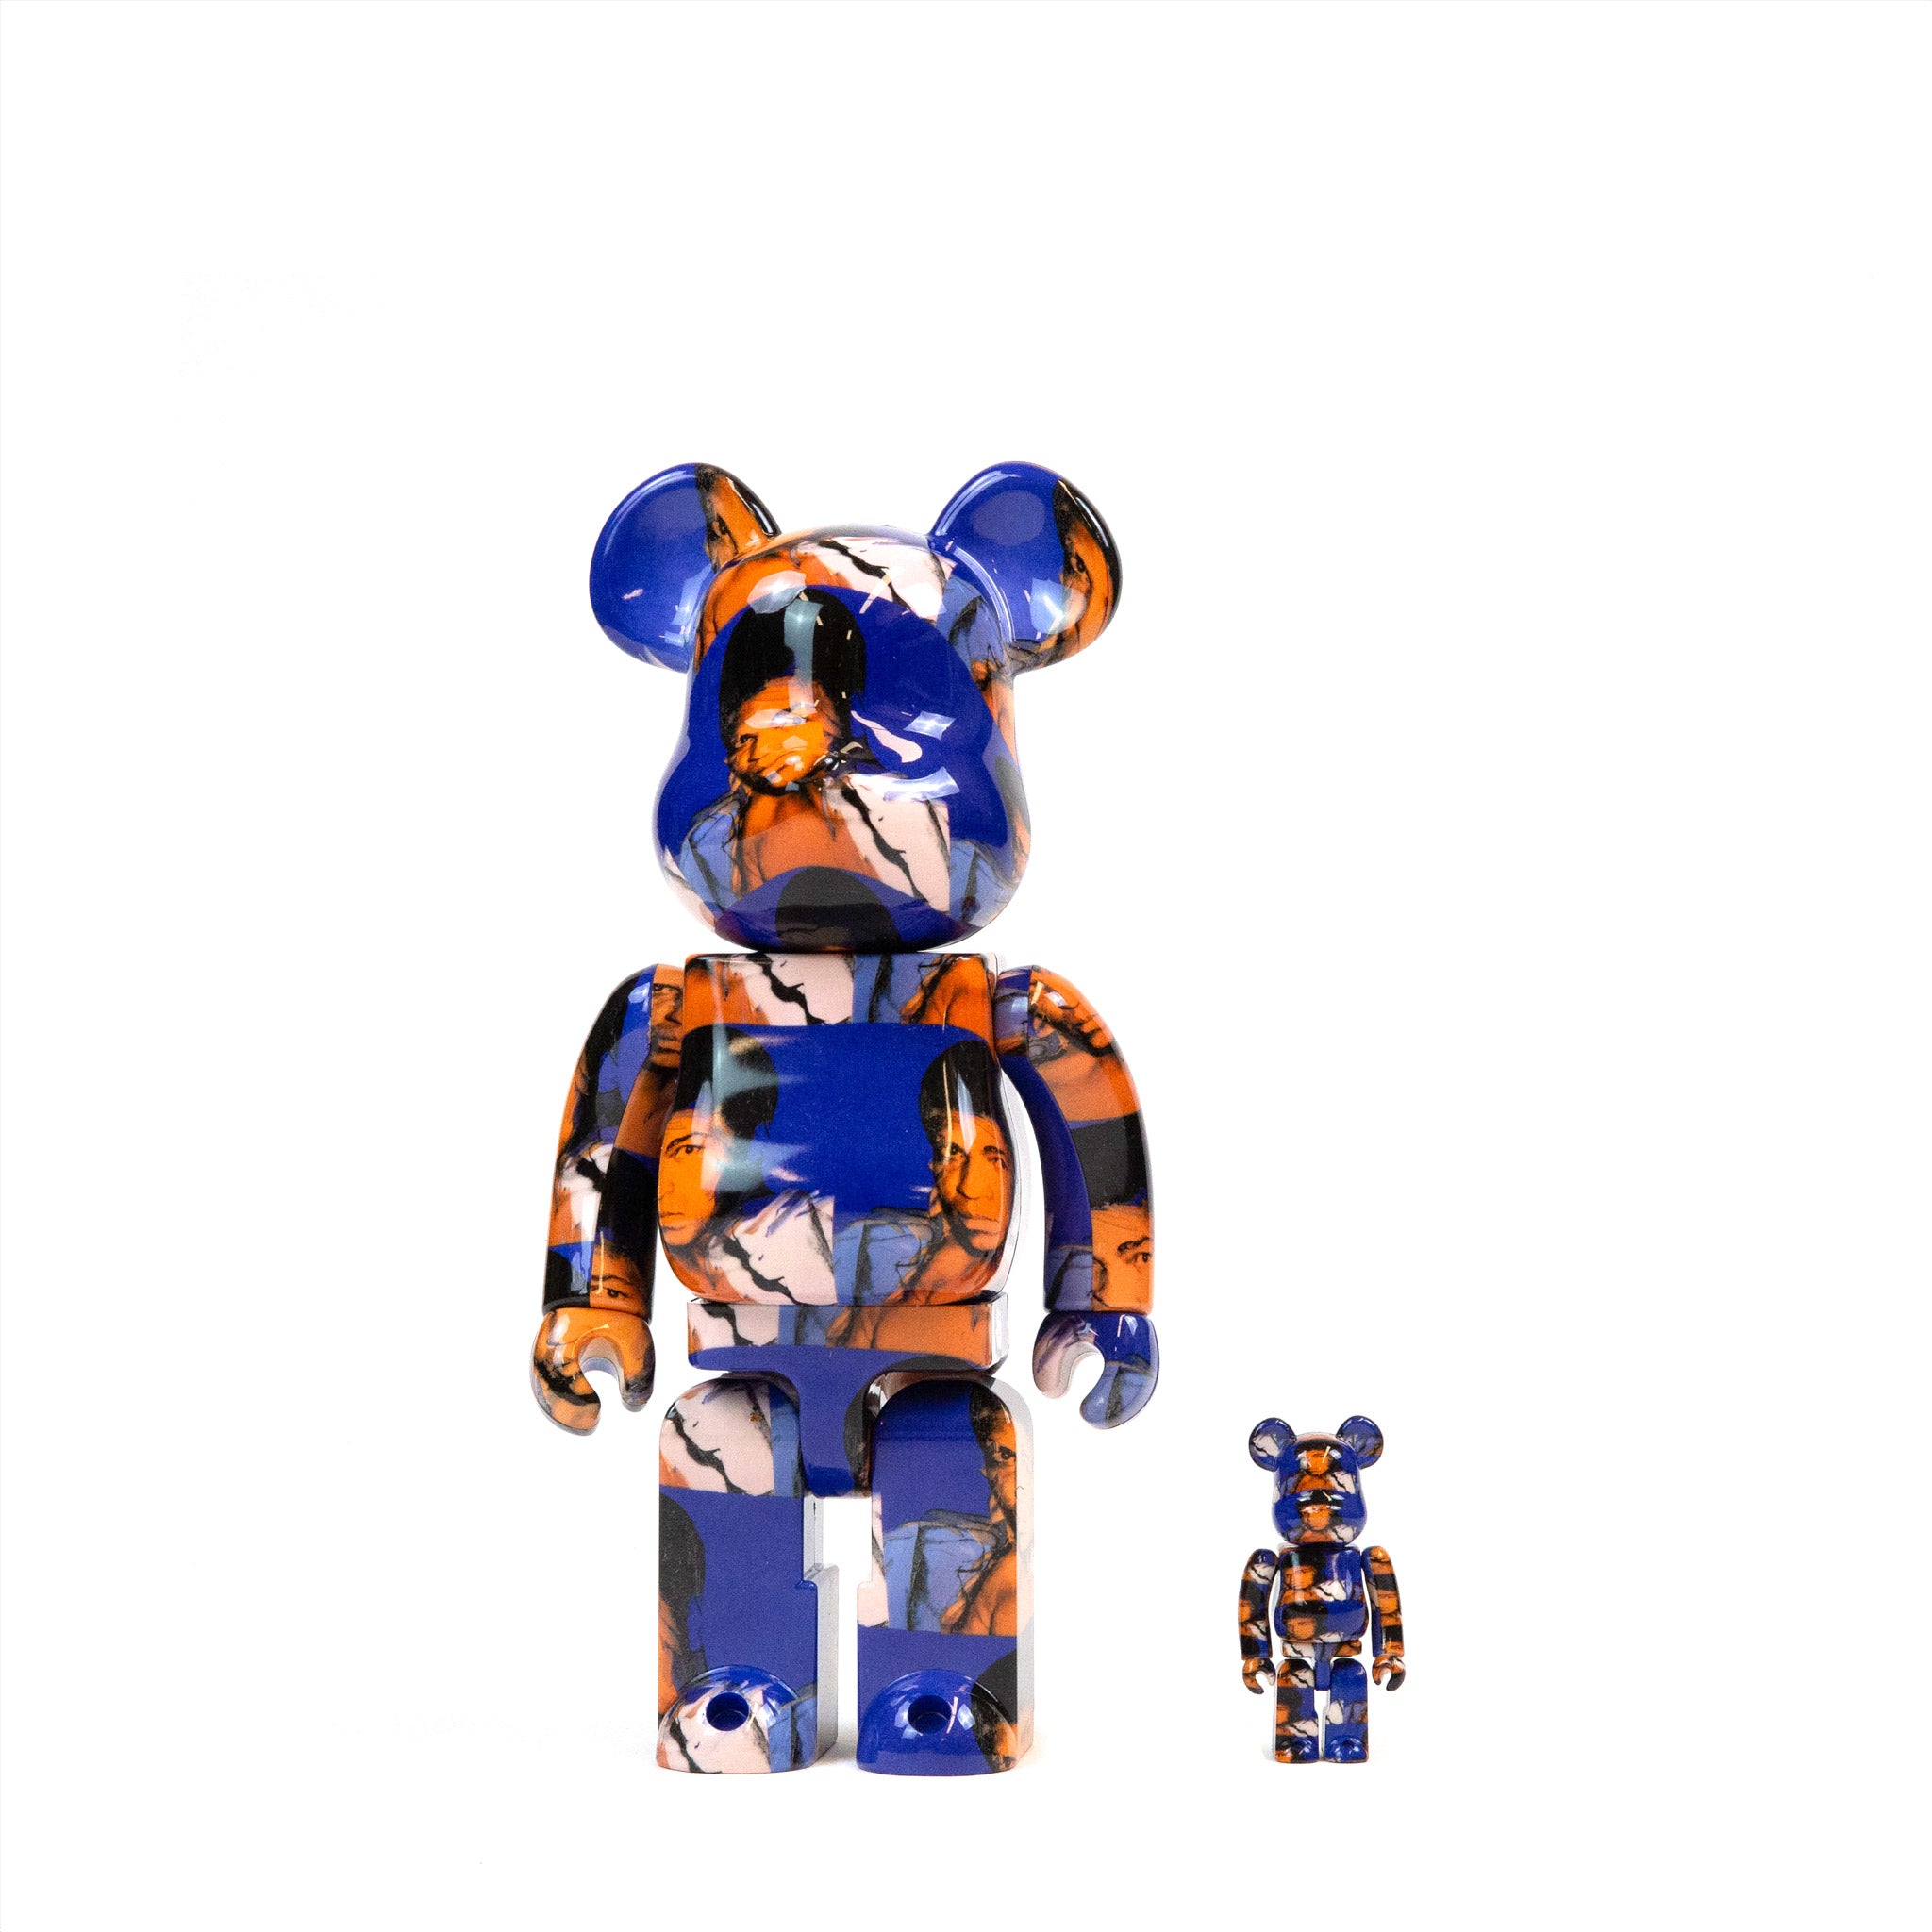 BE@RBRICK ANDY WARHOL “SPECIAL” 400%100%-